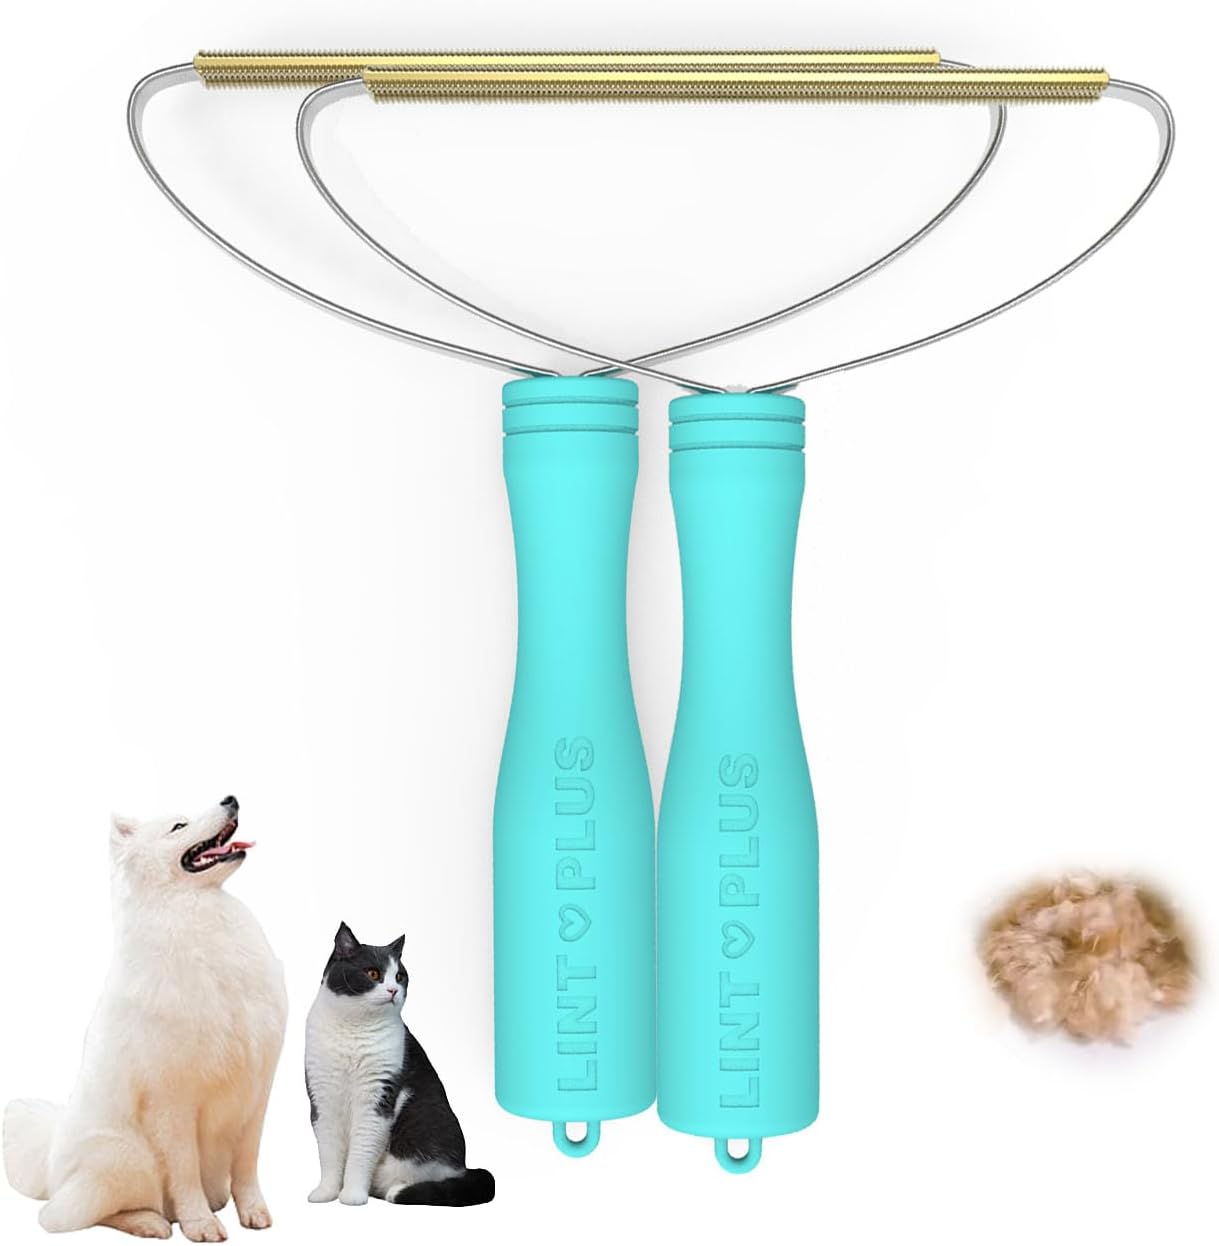 Pet Hair Remover Tool